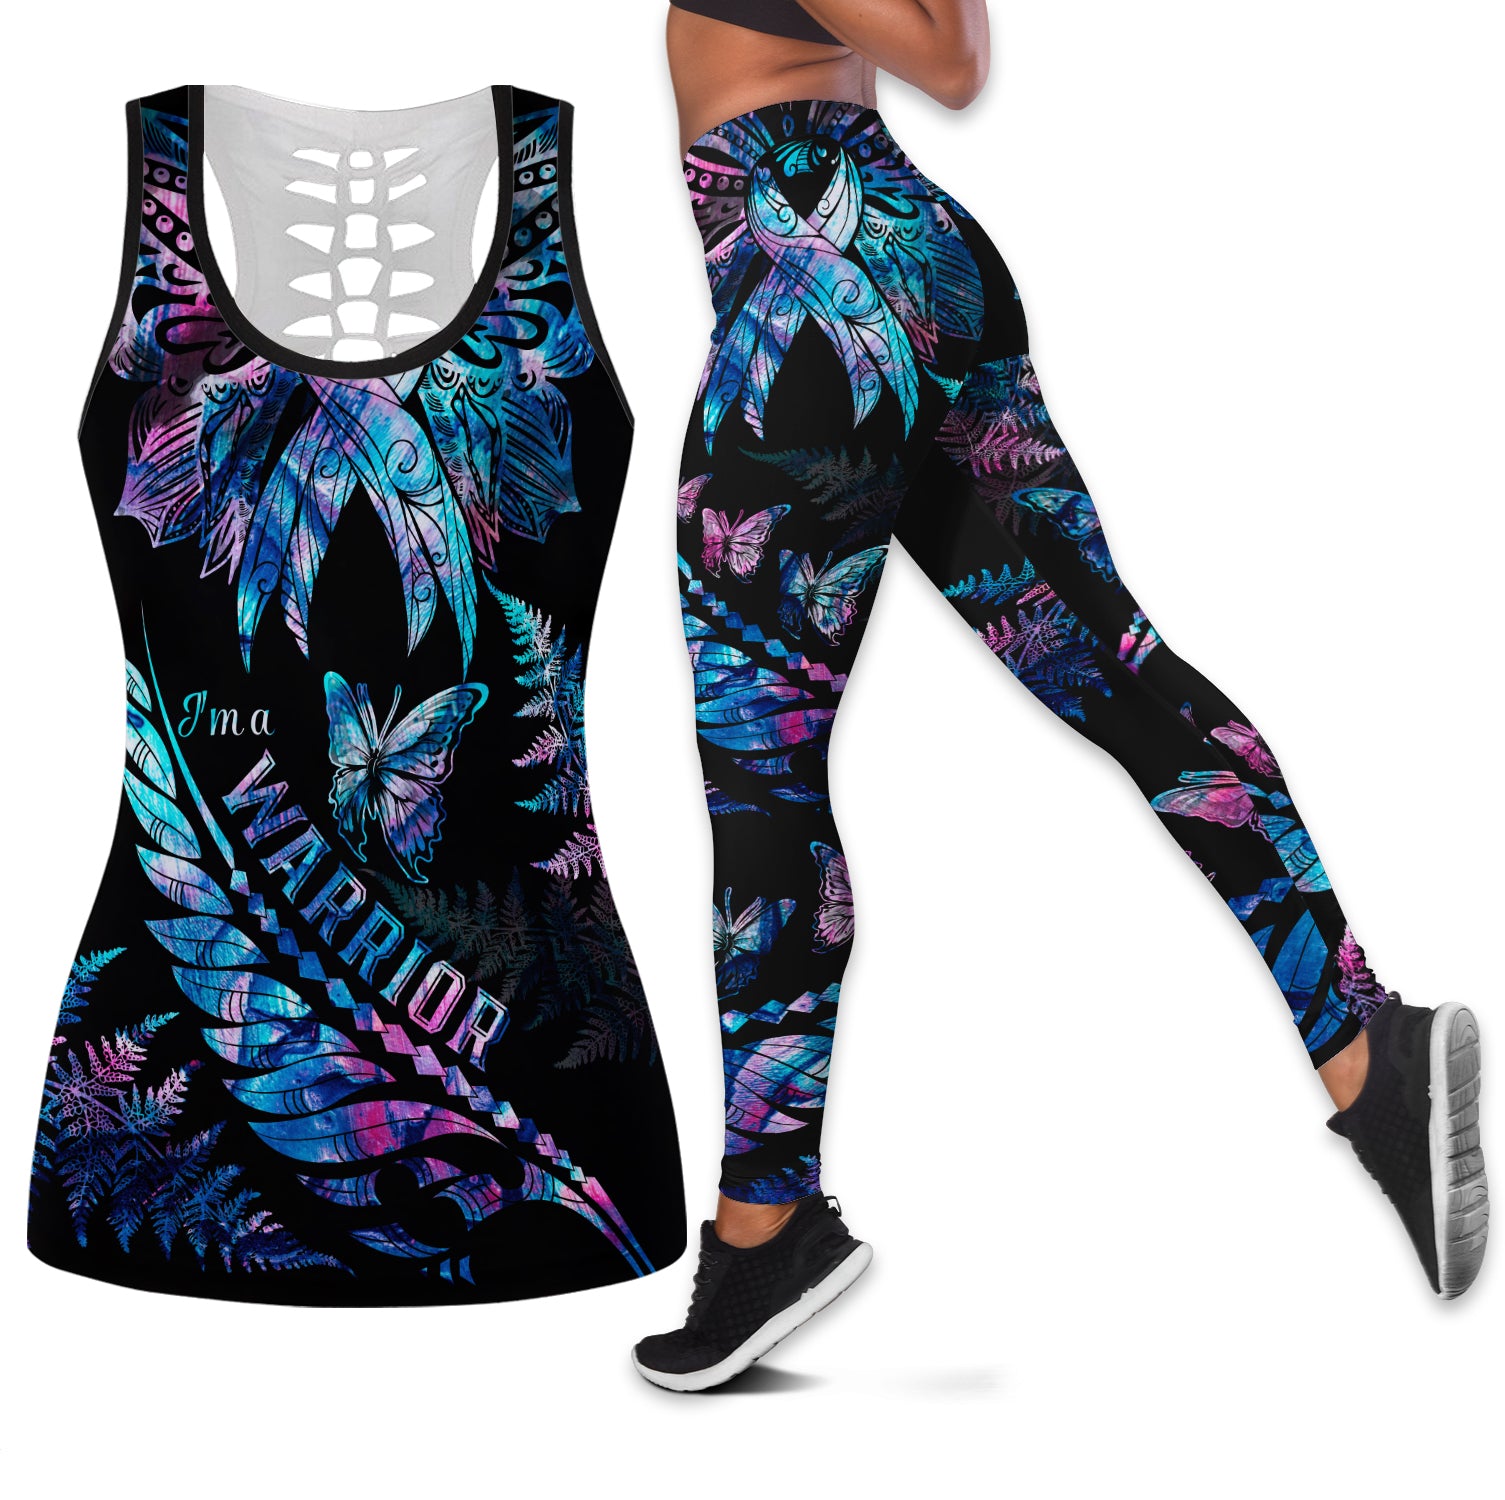 polynesia-ribbon-butterflies-hollow-tank-top-and-leggings-silver-fern-breast-cancer-with-papua-shell-pattern